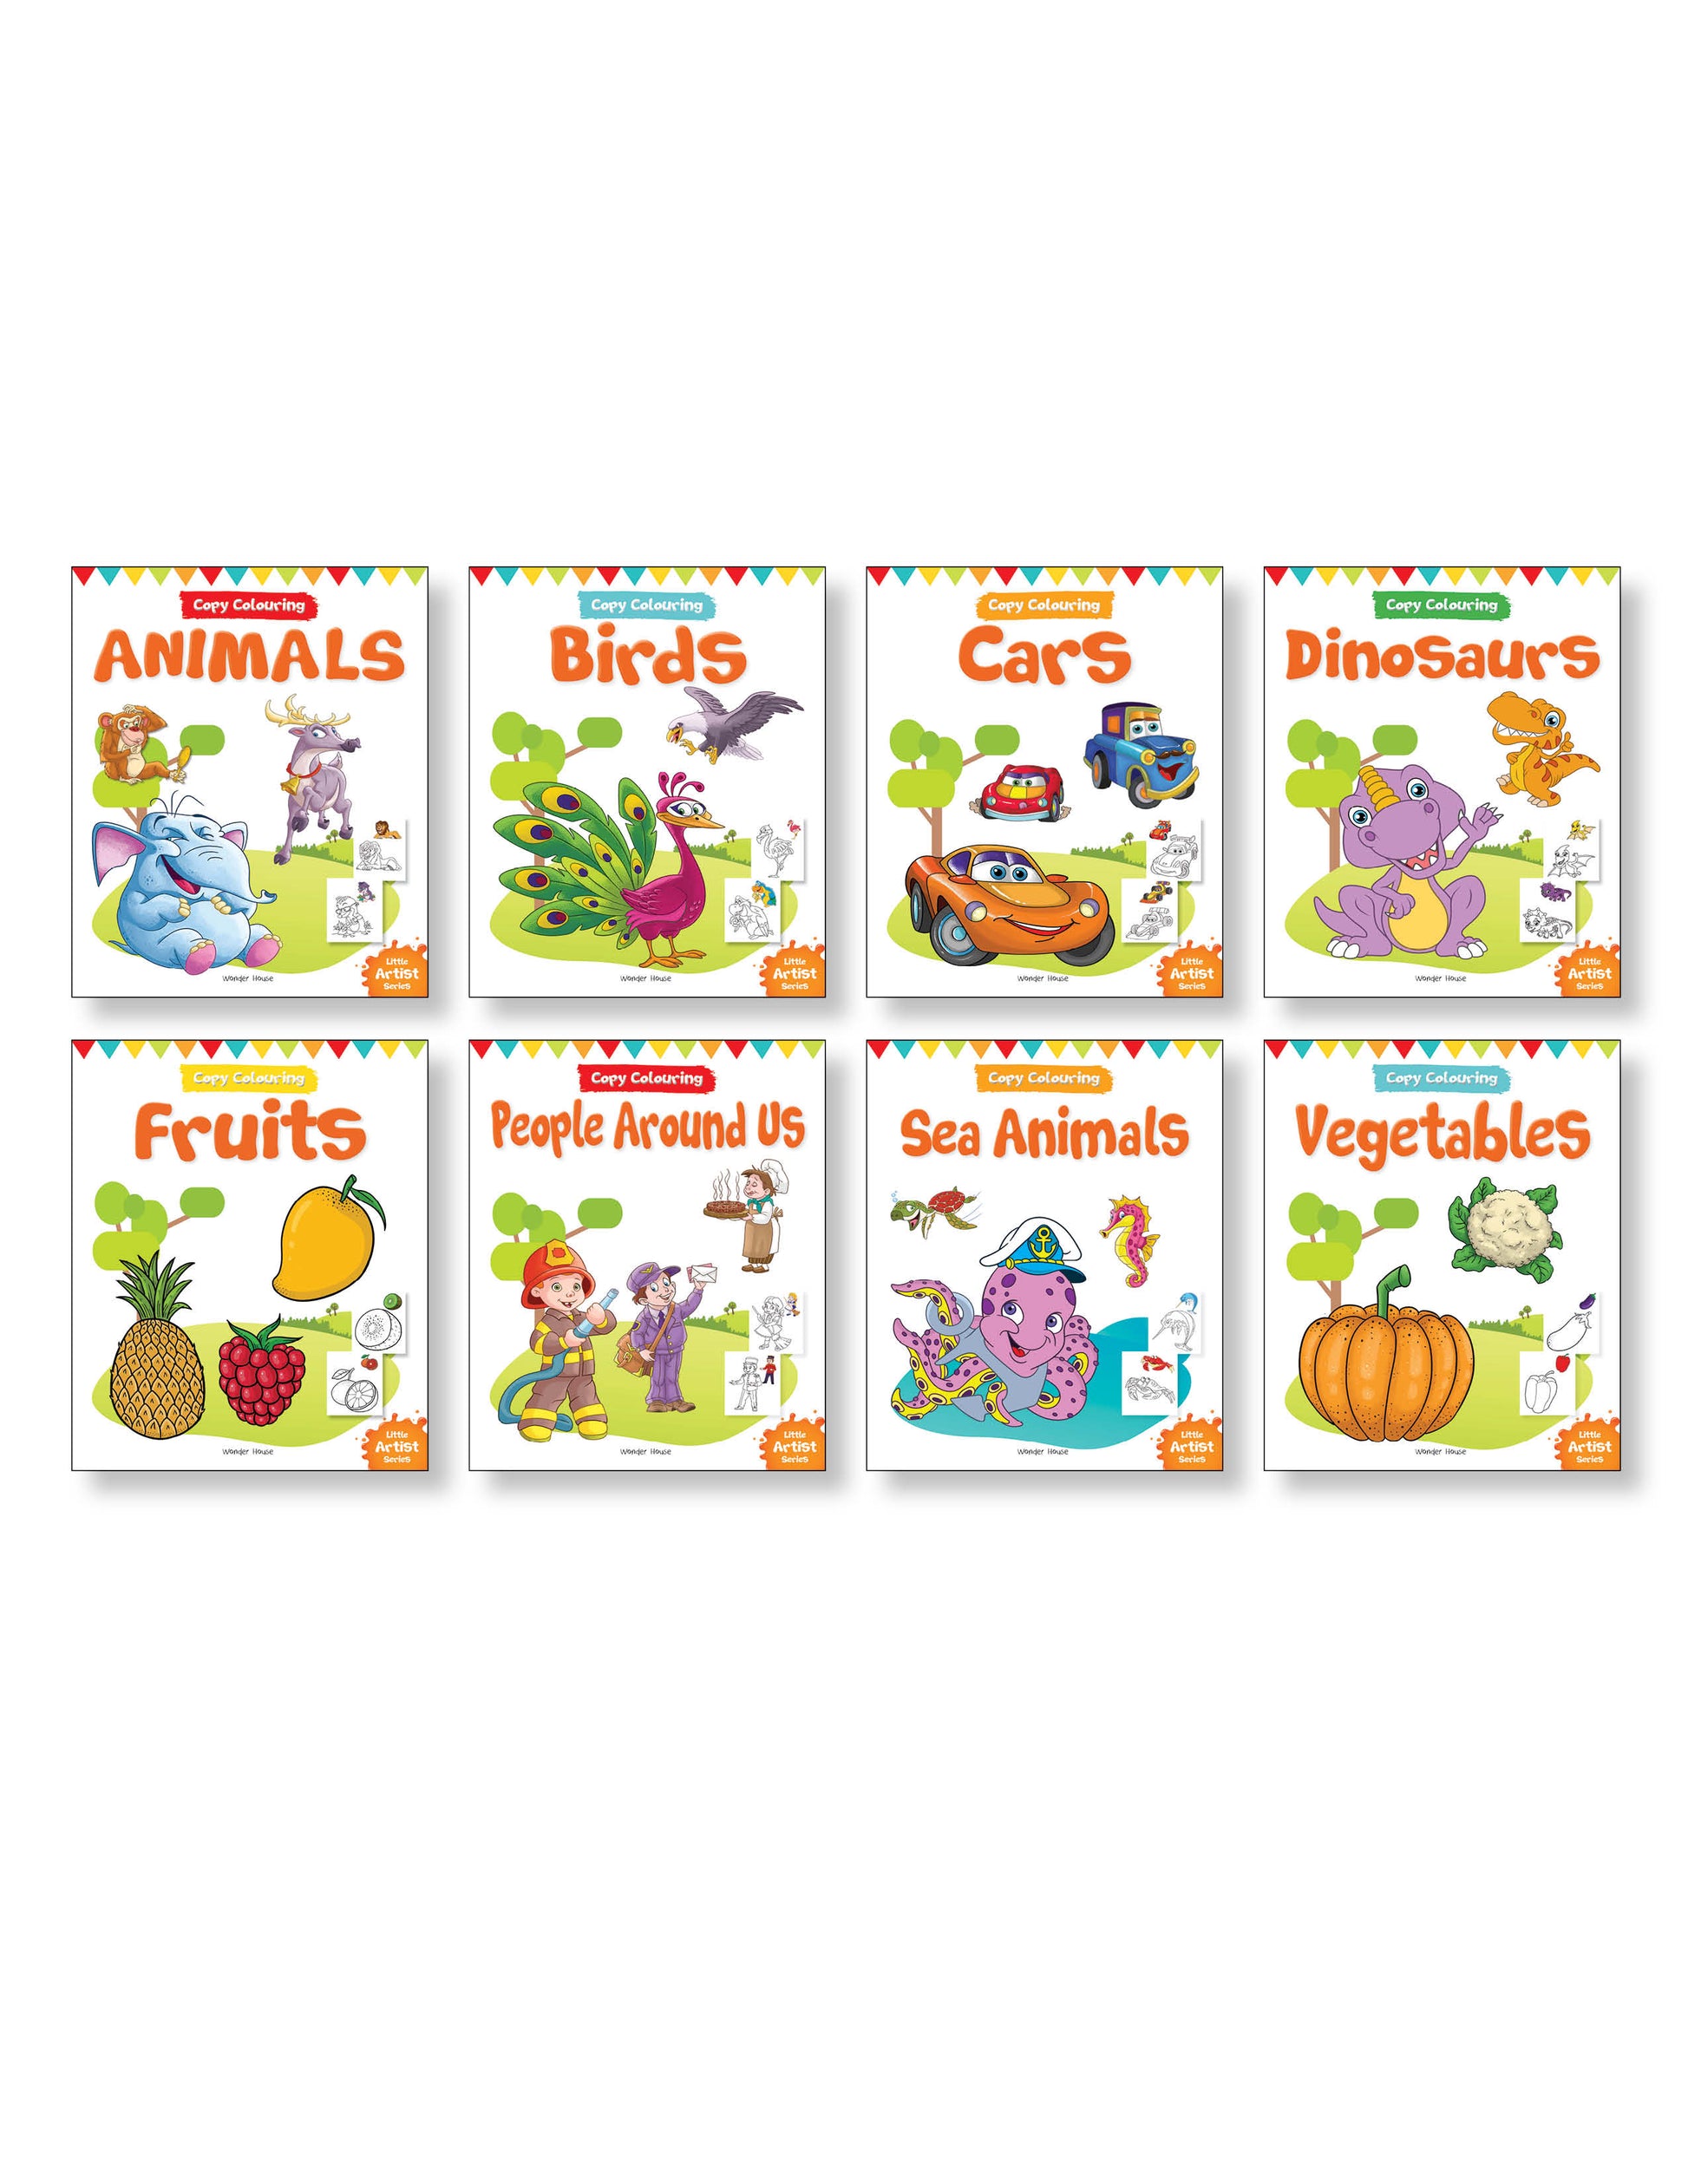 Little Artist Copy Colouring Boxset : Pack of 8 Books (Birds, Sea Animals, Fruits, Vegetables, Dinosaurs, Cars and People Around Us)